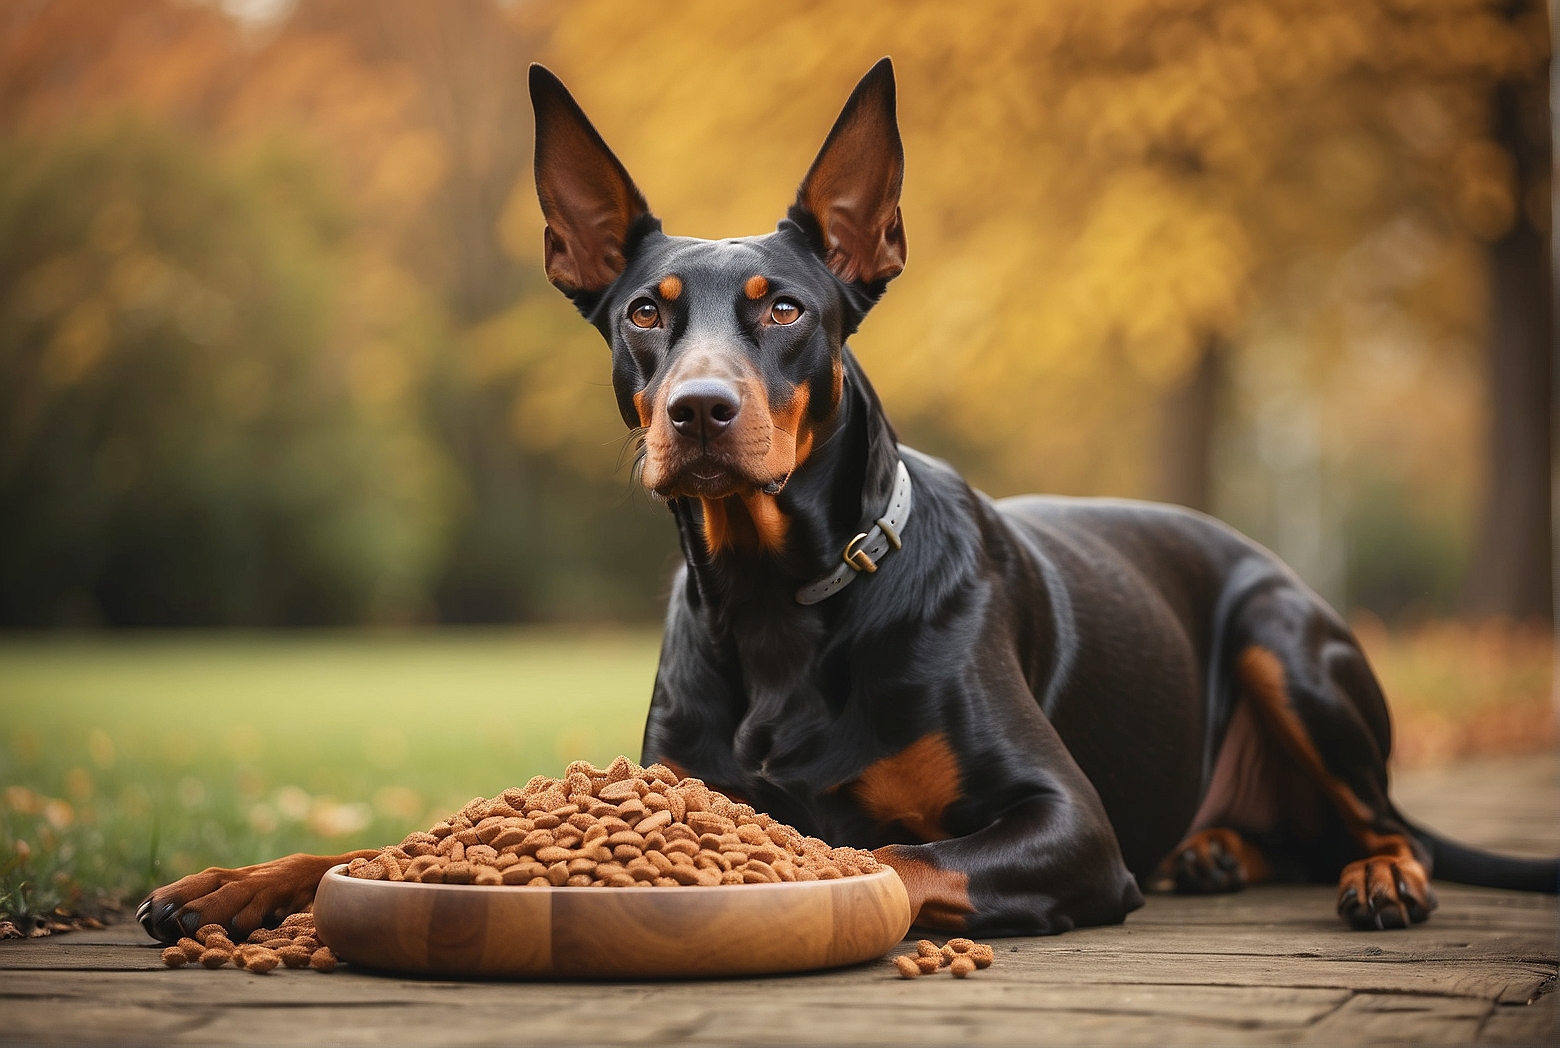 Top 5 Dog Foods for Weight Loss in Dobermans